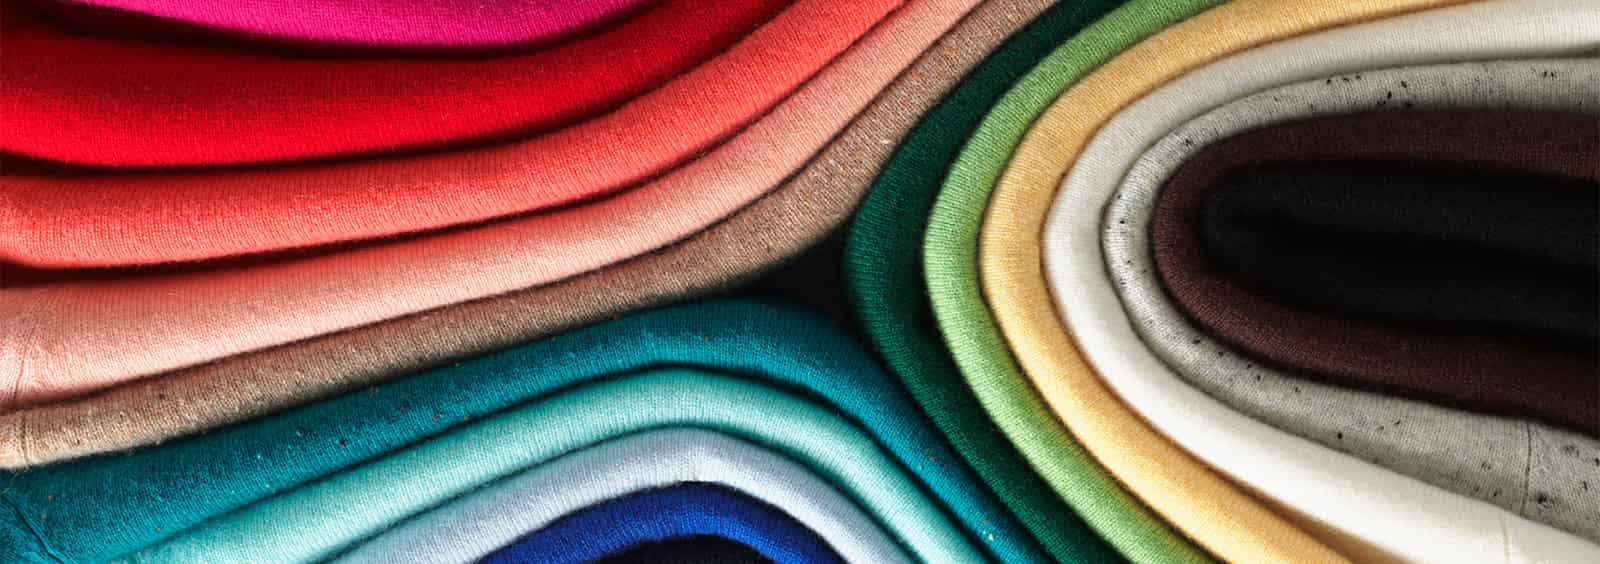 How to Choose a Cashmere Sweater That Your Mom Will Love